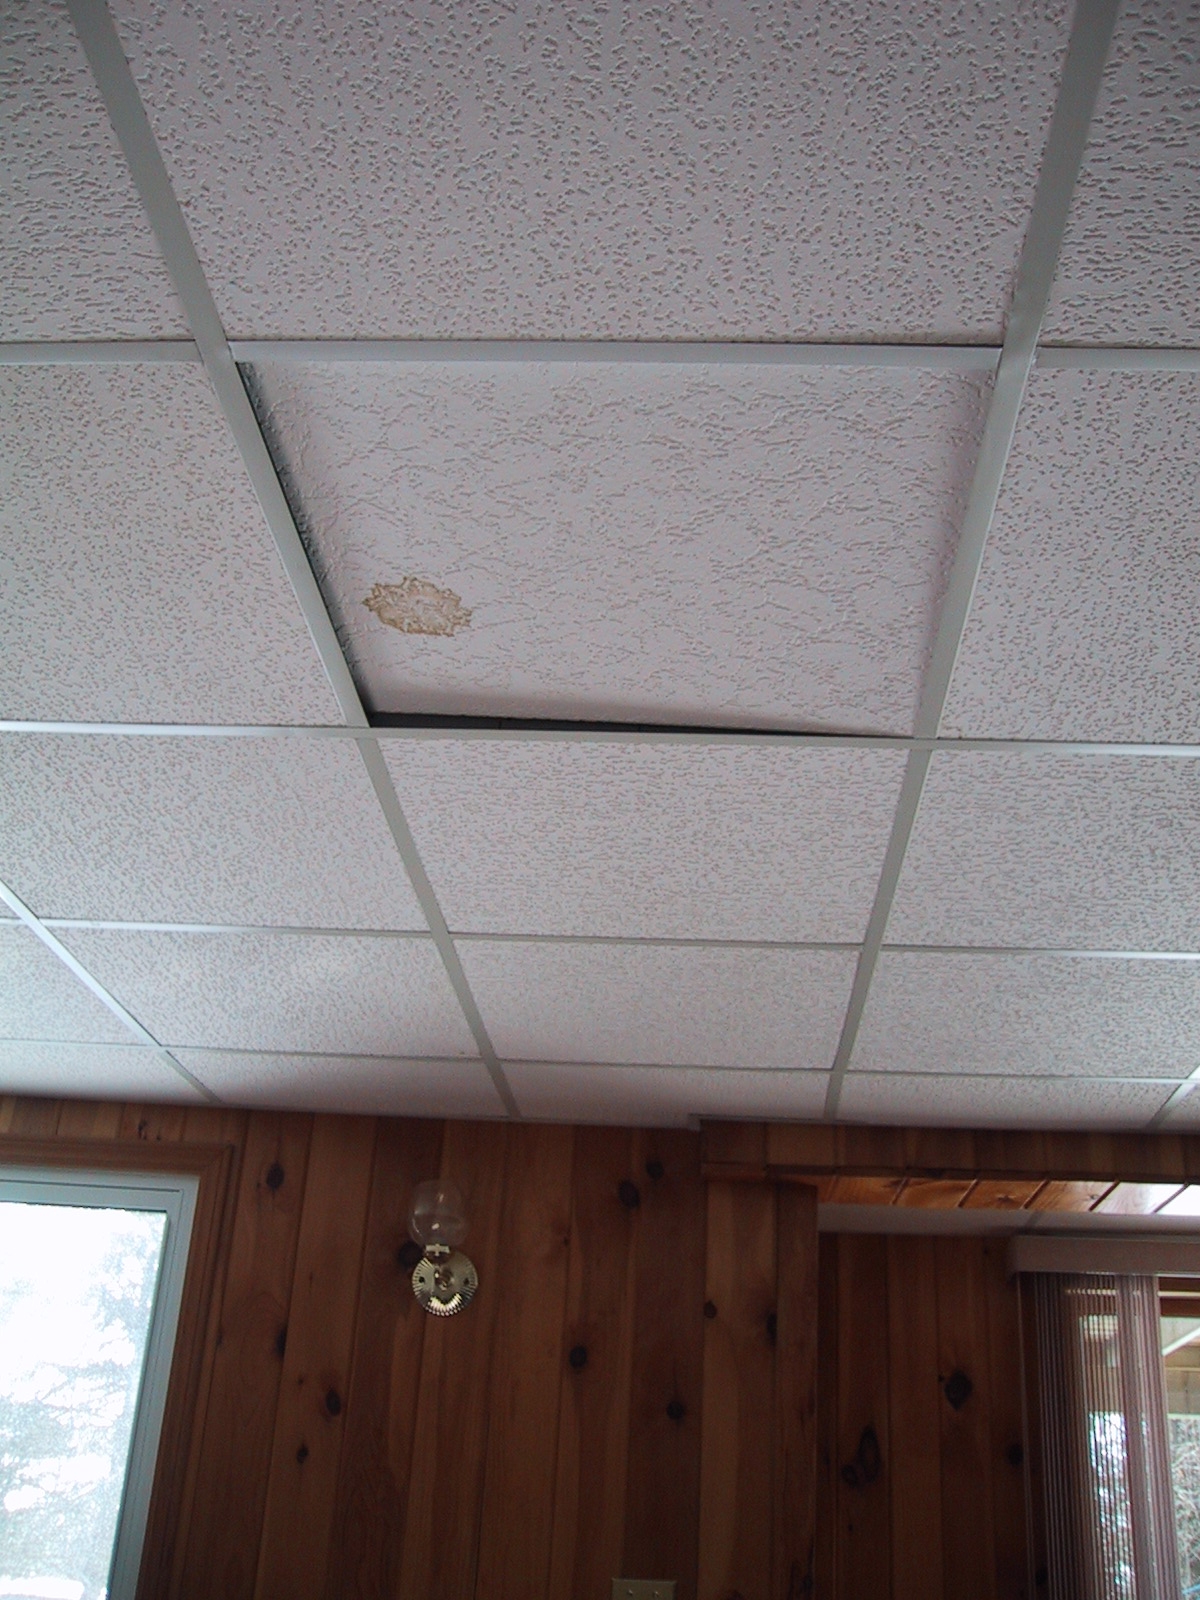 New Drop Ceiling Tiles New Drop Ceiling Tiles basement ceiling leak part 1 the discovery 1200 X 1600